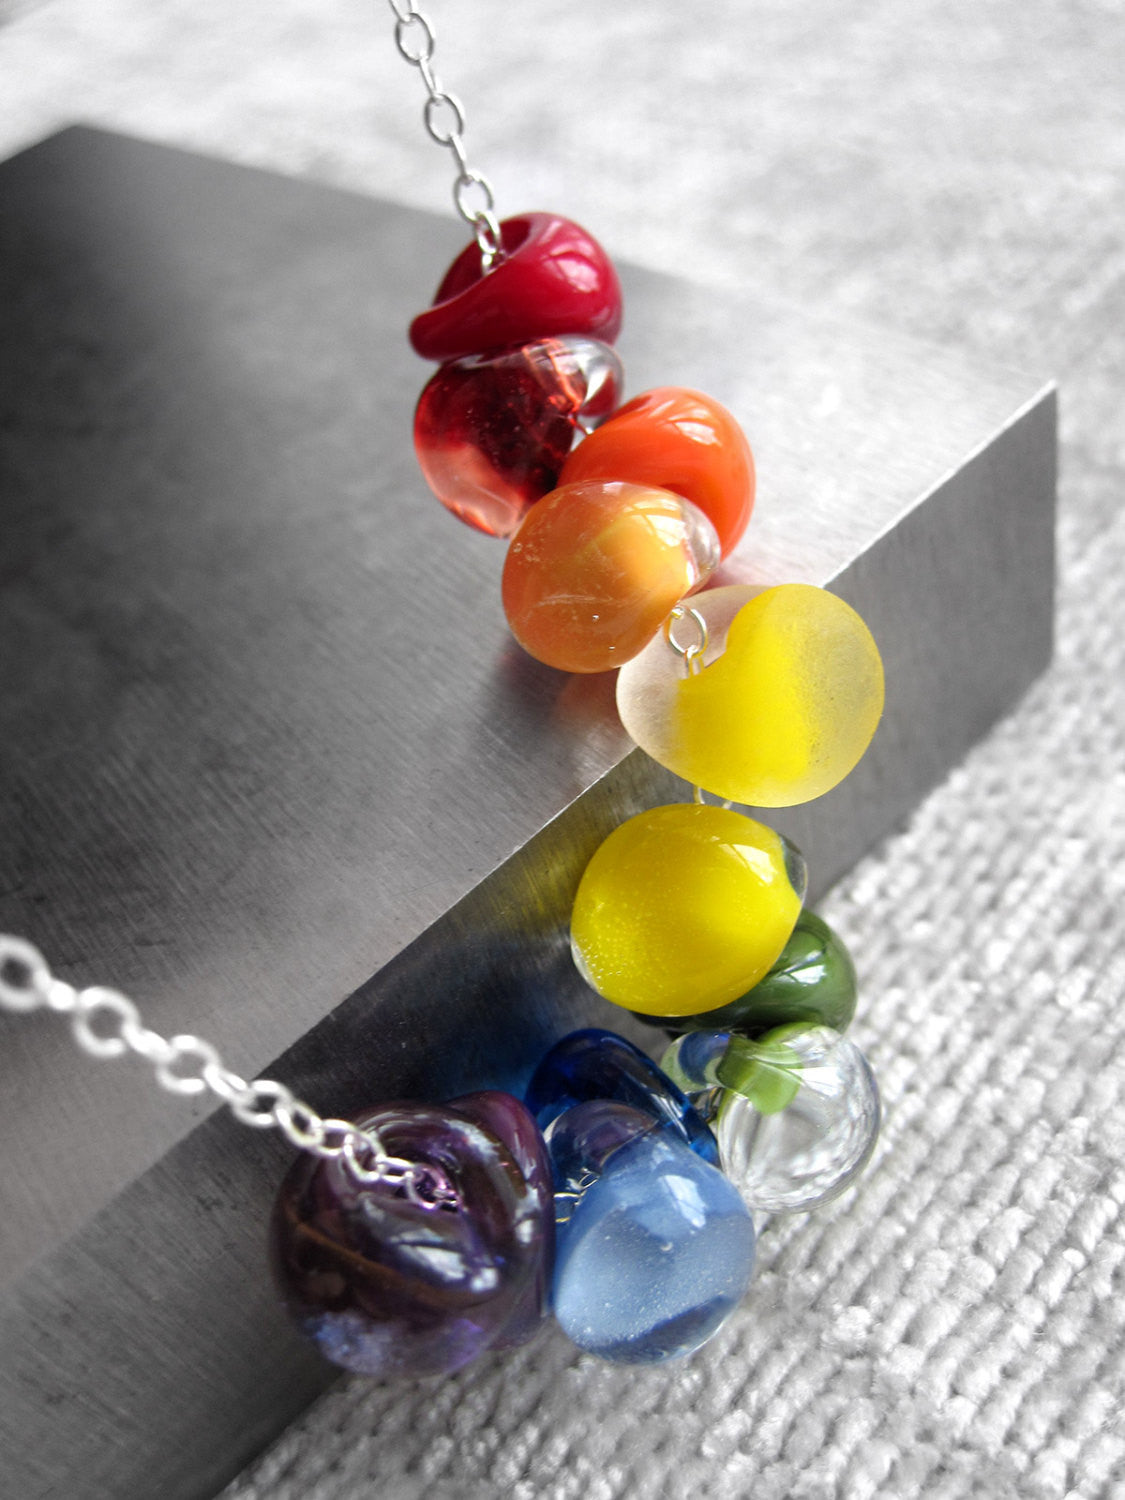 Rainbow Necklace - $20 Donation to Time Out Youth